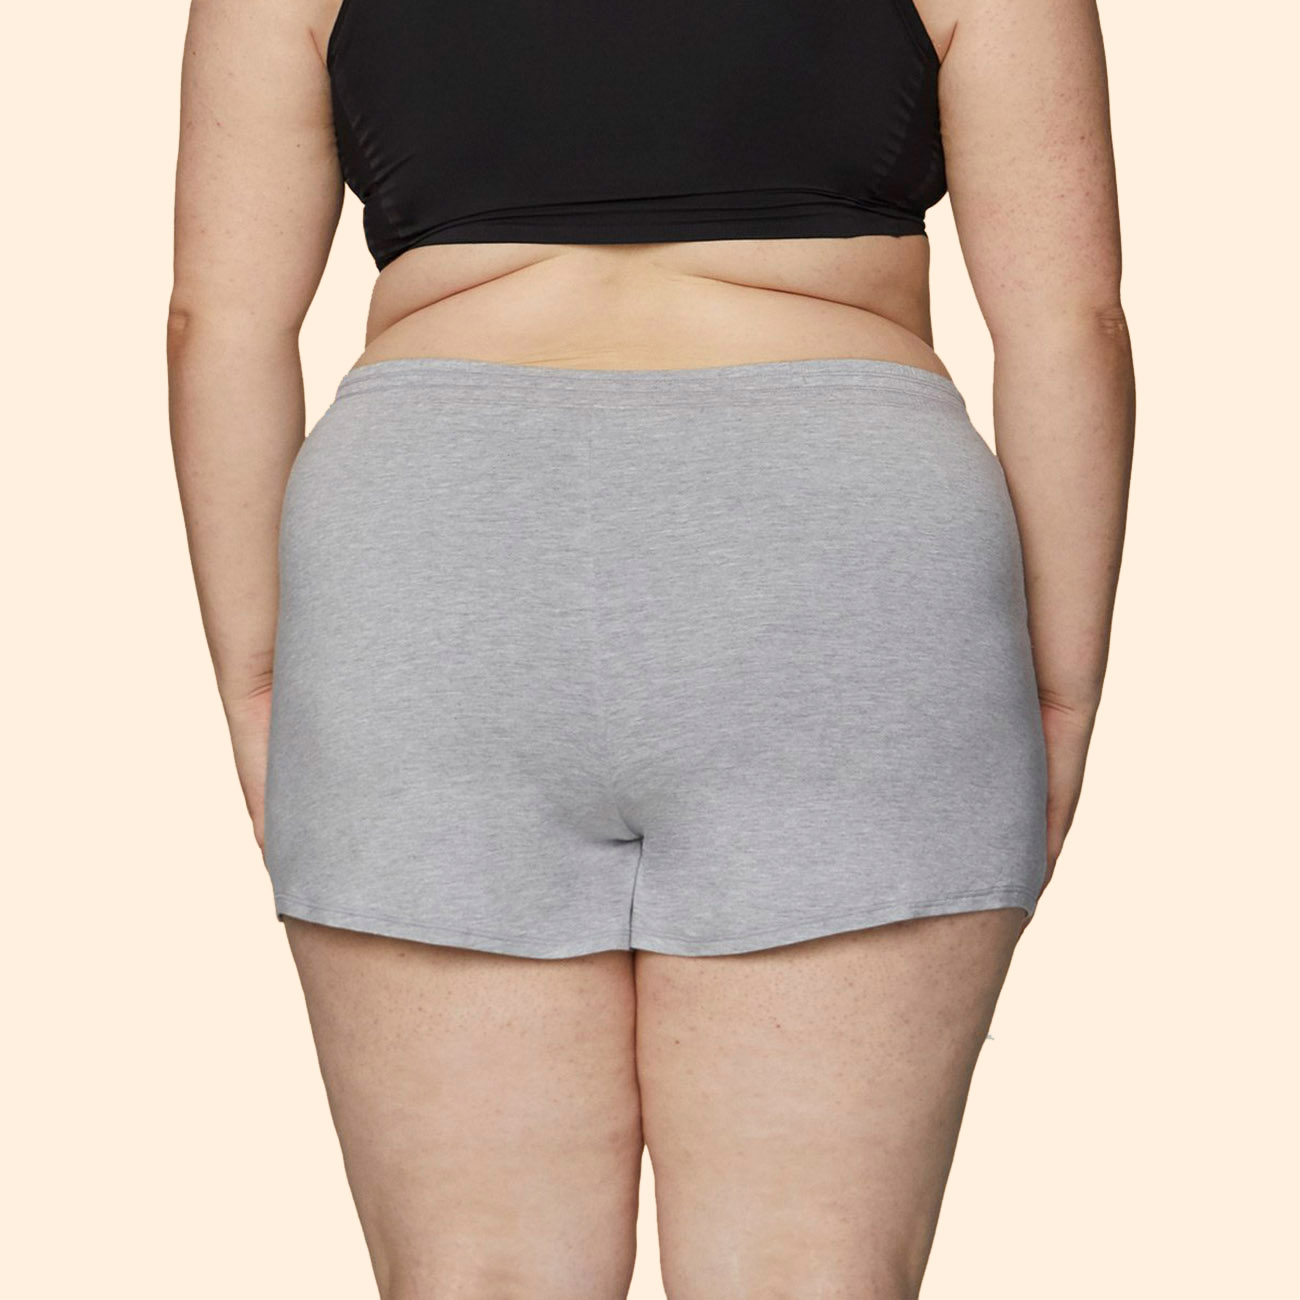 Thinx expands line to offer Sleep Shorts for overnight protection